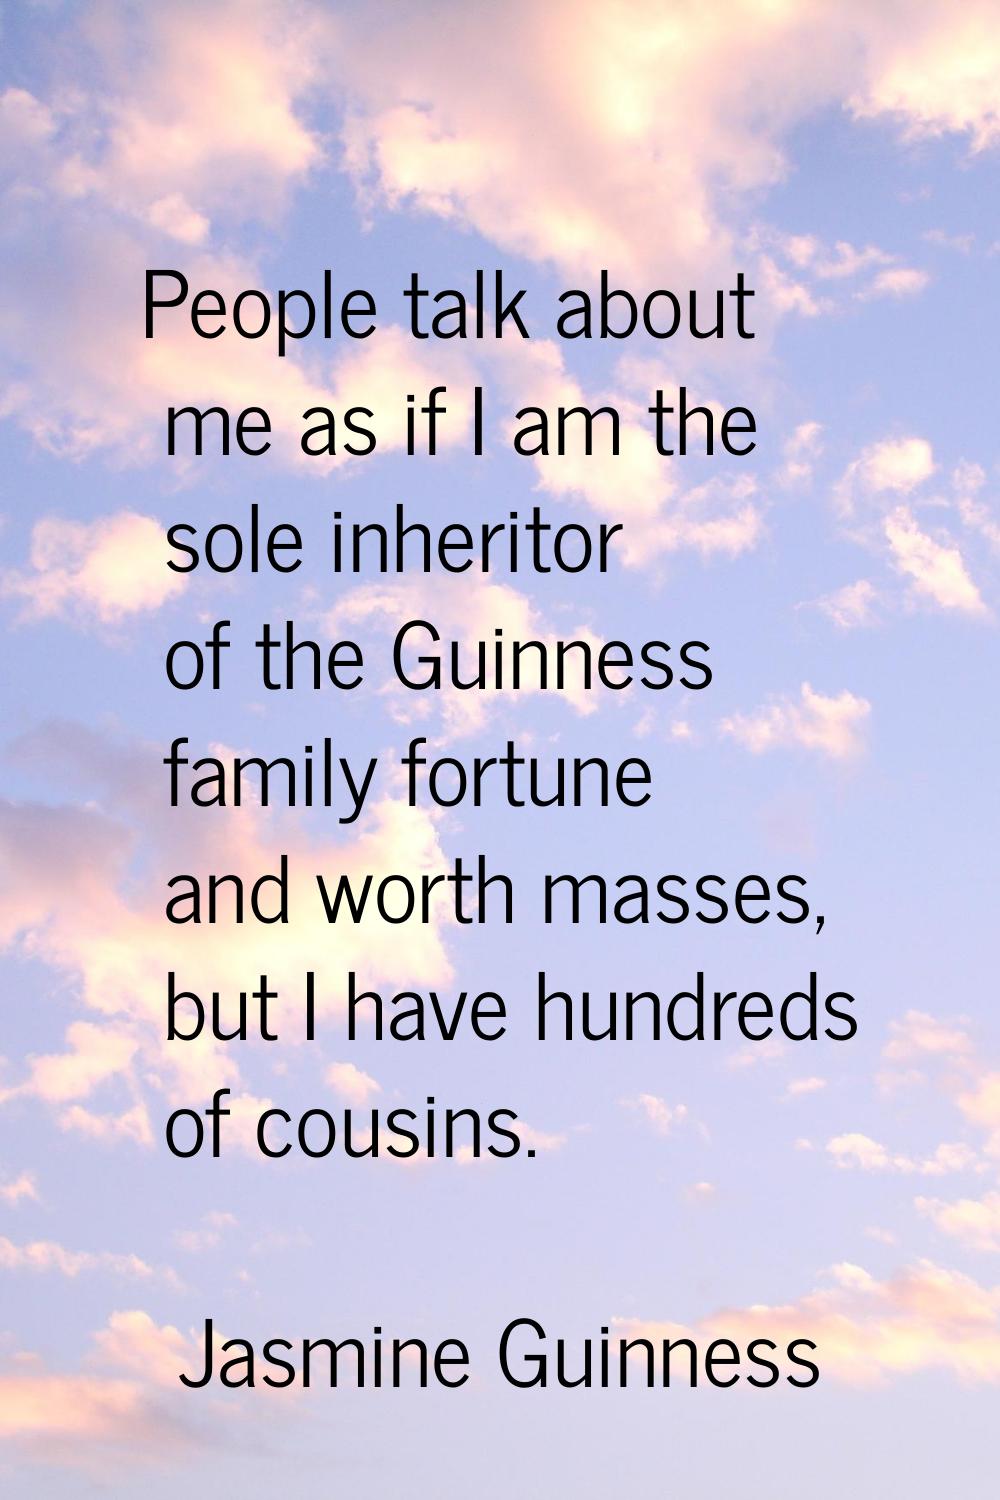 People talk about me as if I am the sole inheritor of the Guinness family fortune and worth masses,